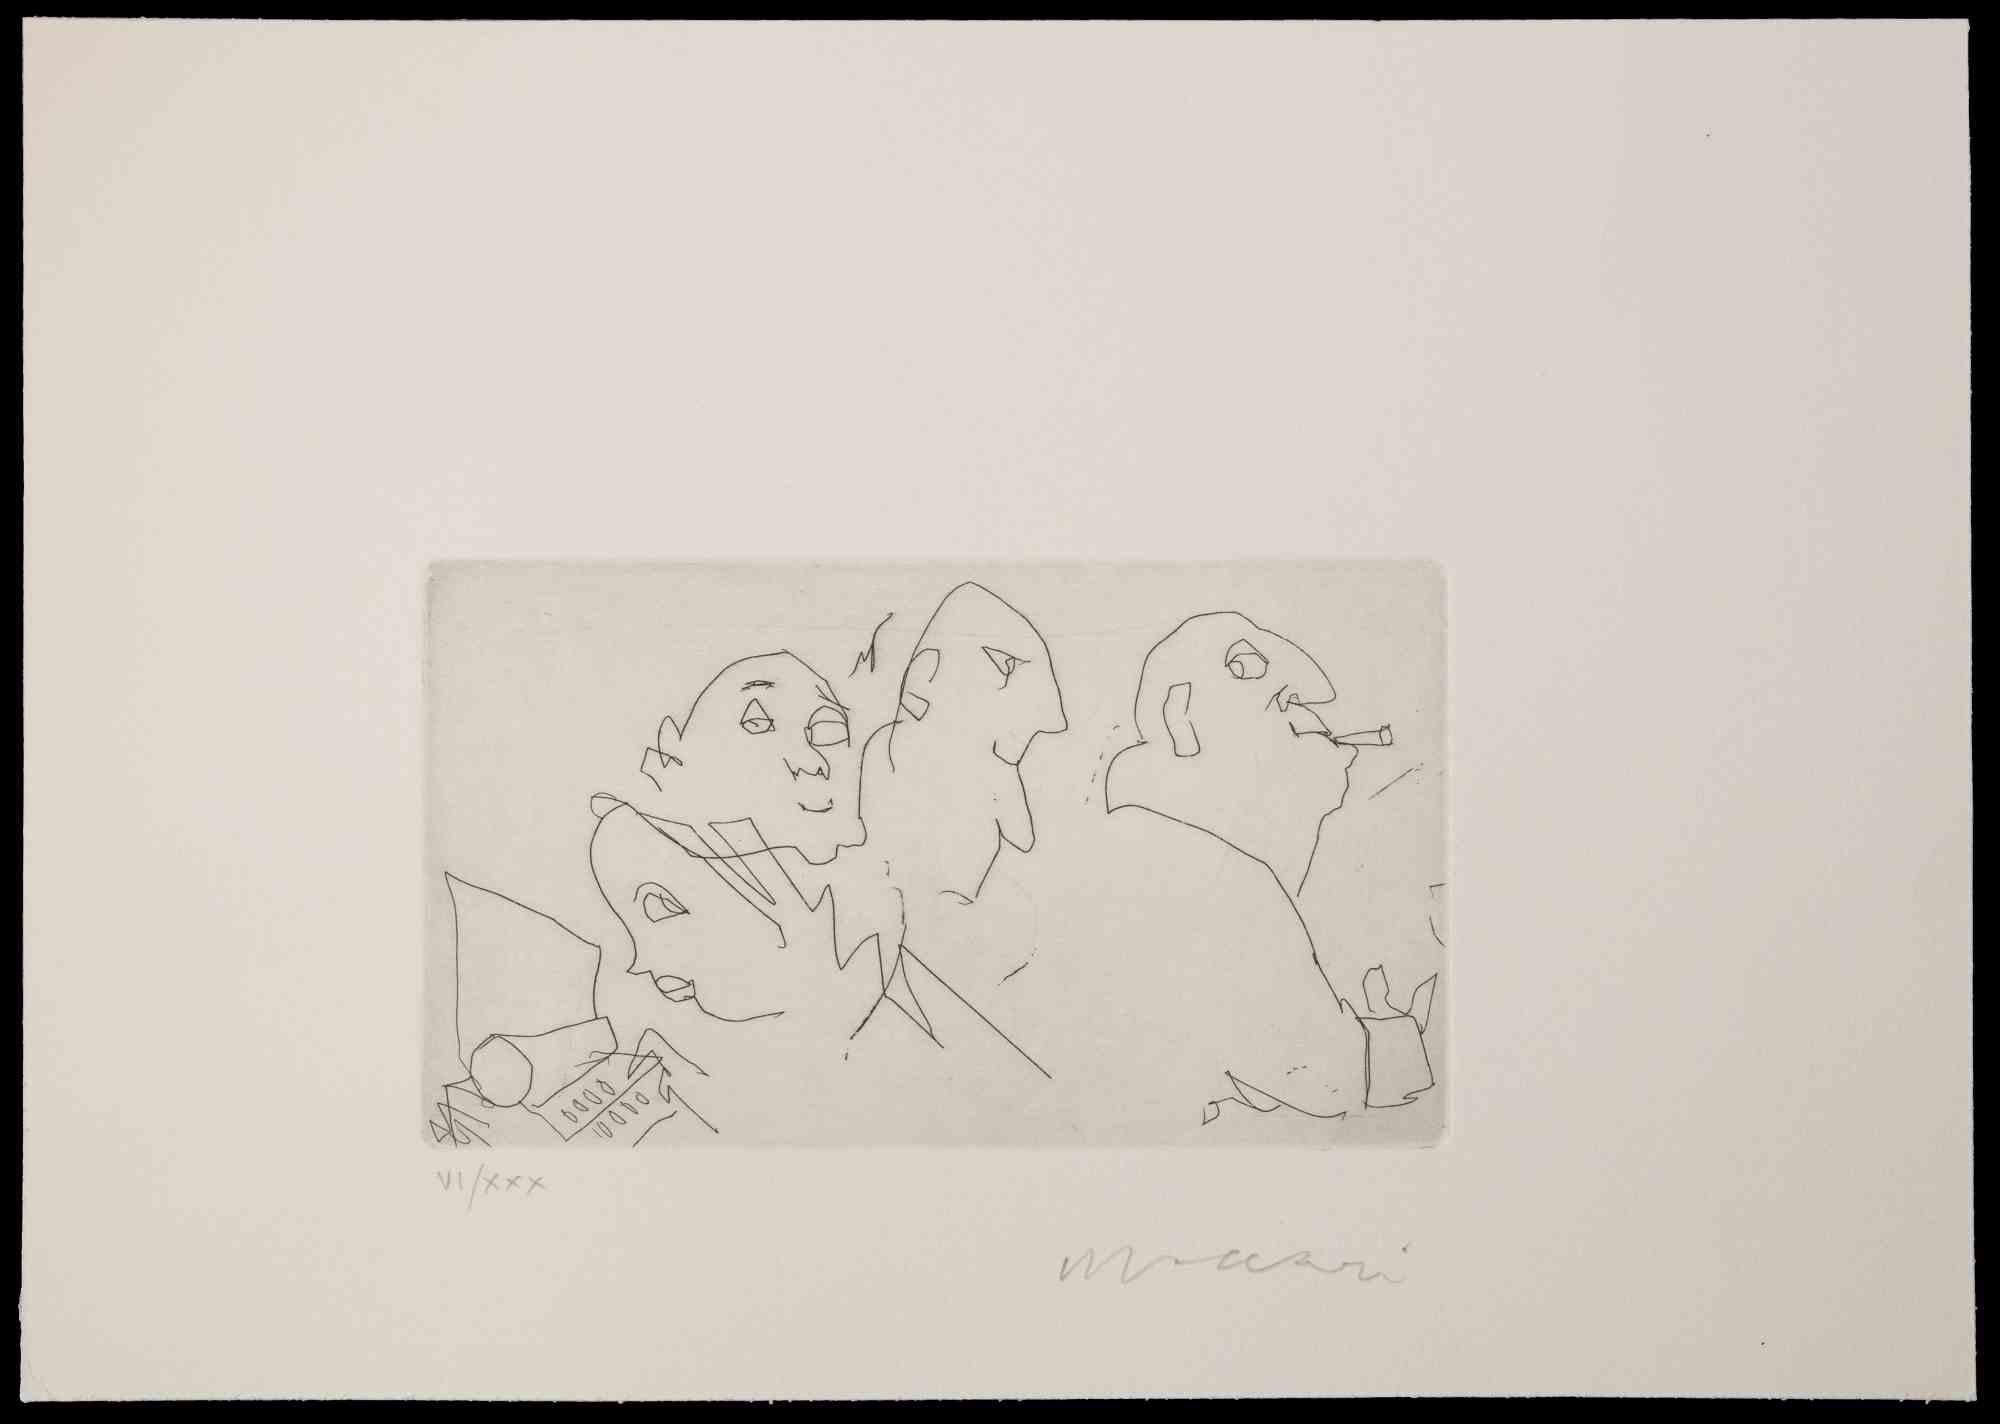 The Meeting is an original Etching realized by Mino Maccari in mid-20th Century.

Good conditions.

Hand-signed by the artist with pencil.

Numbered. Edition, VI/XXX.

Mino Maccari (1898-1989) was an Italian writer, painter, engraver and journalist,